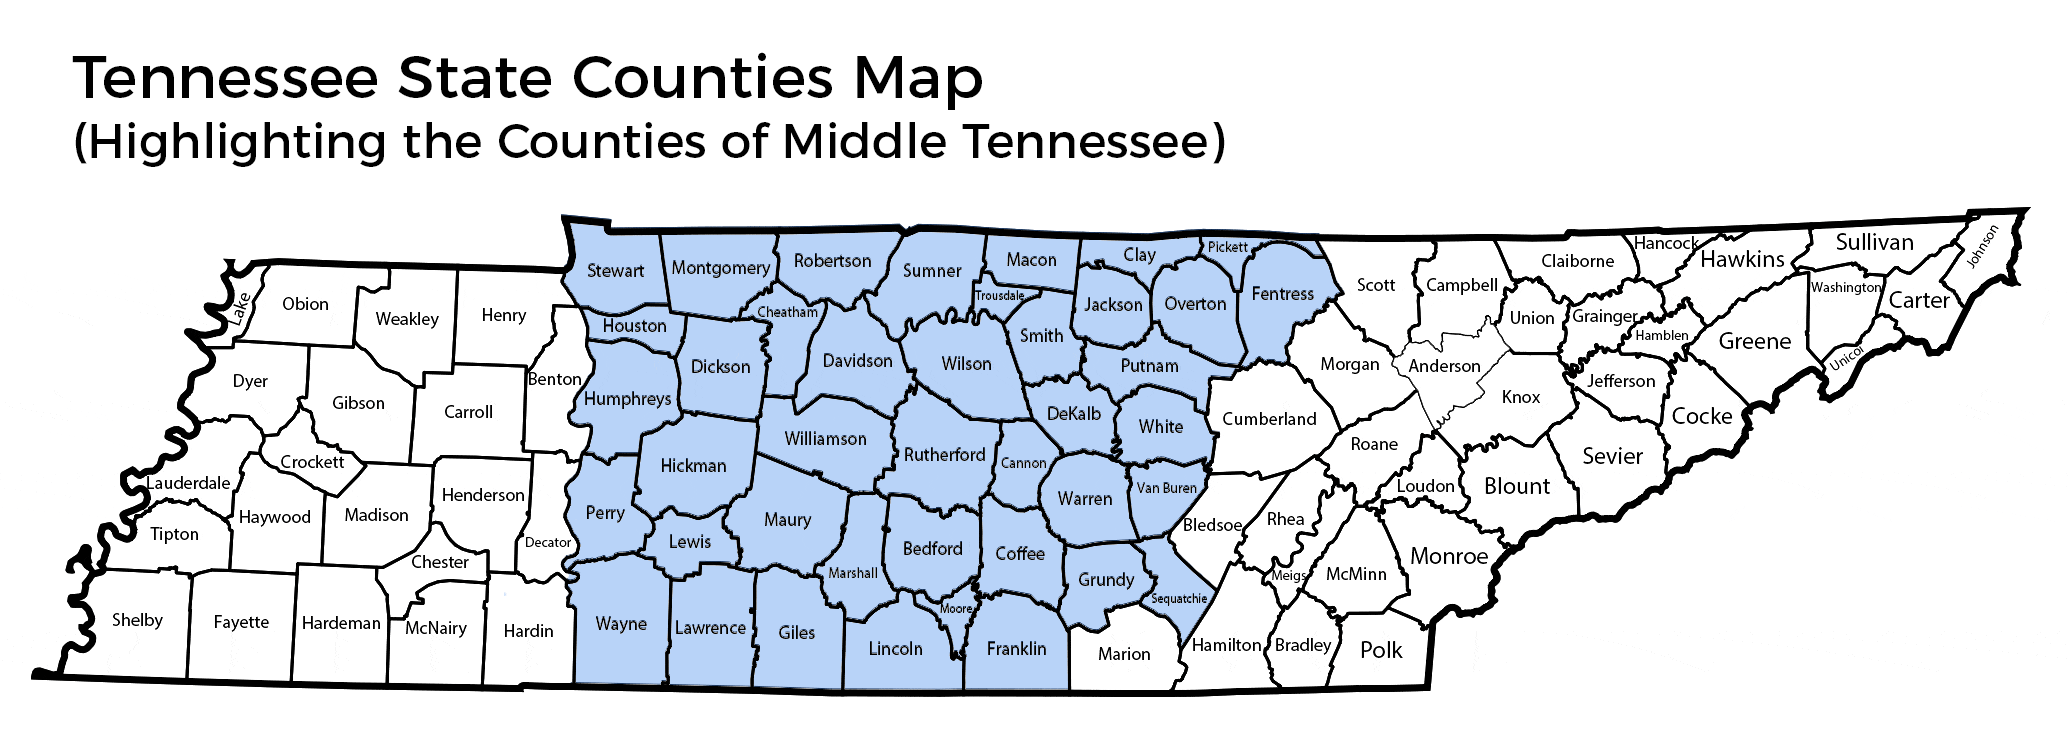 Tennessee State Counties. Highlighting Counties of Middle Tennessee.. Reliant Realty ERA Powered.